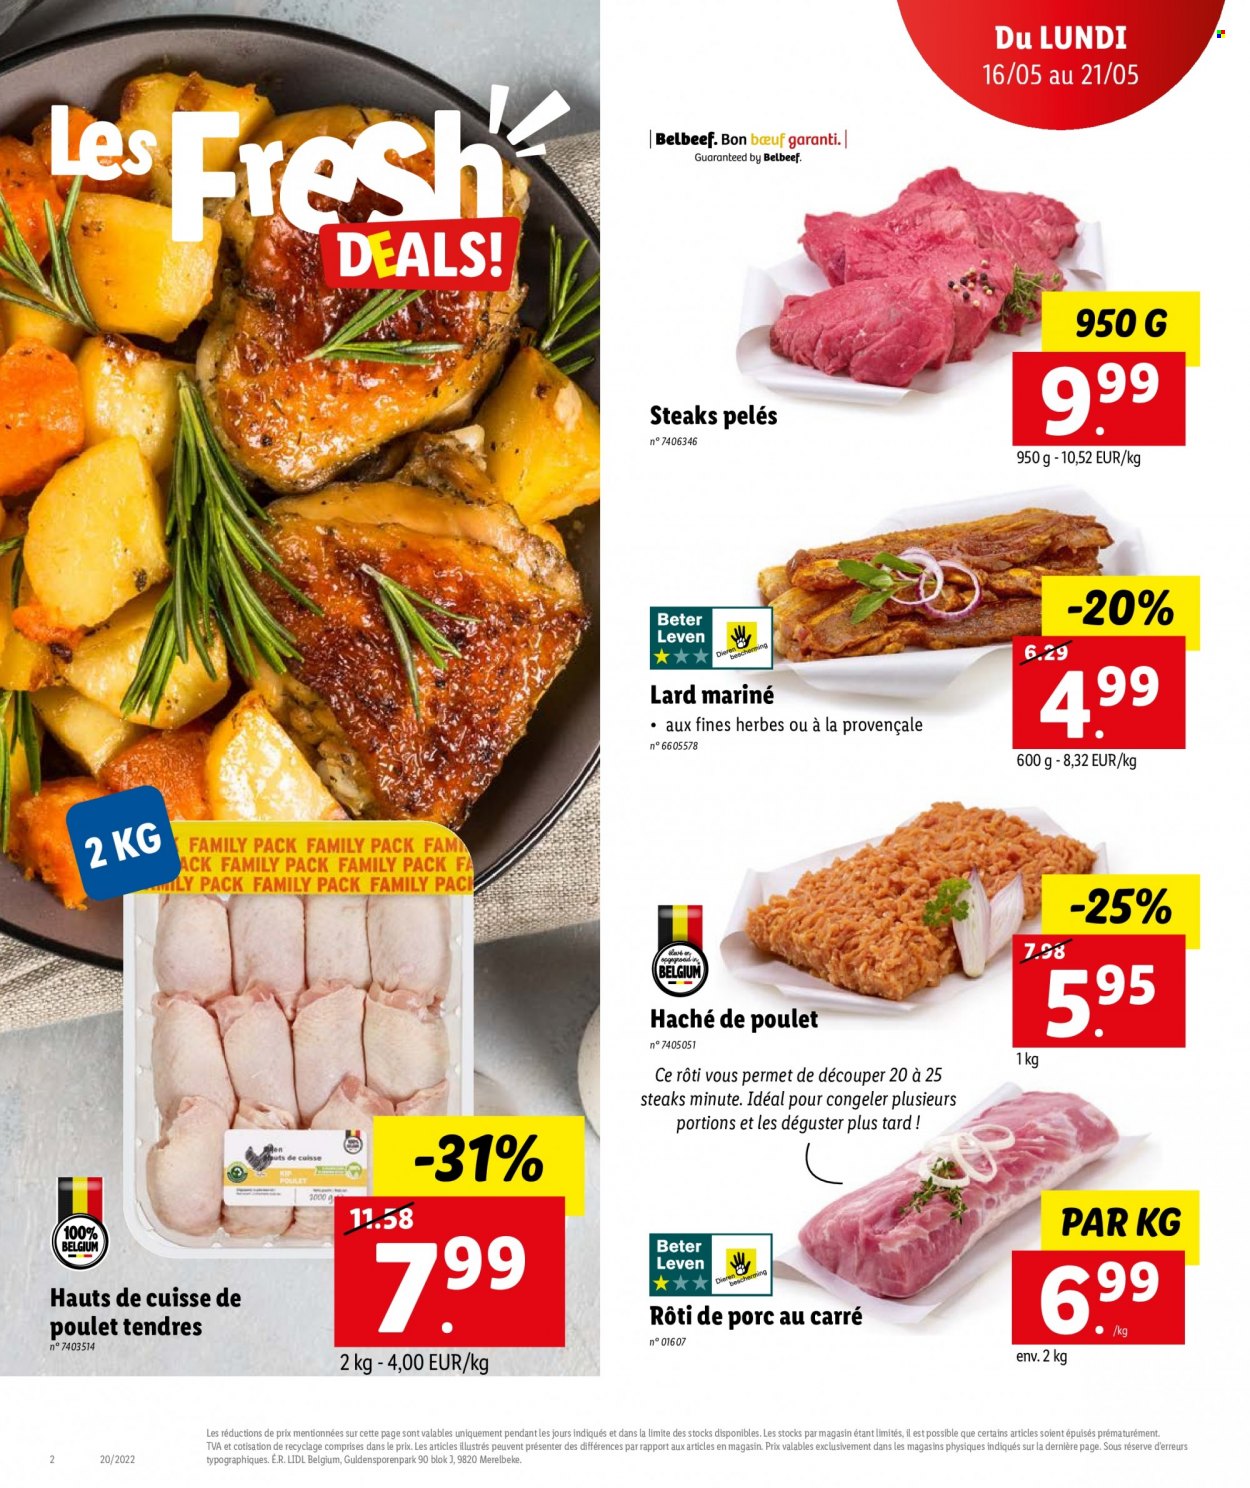 Catalogue Lidl - 16.5.2022 - 21.5.2022. Page 2.